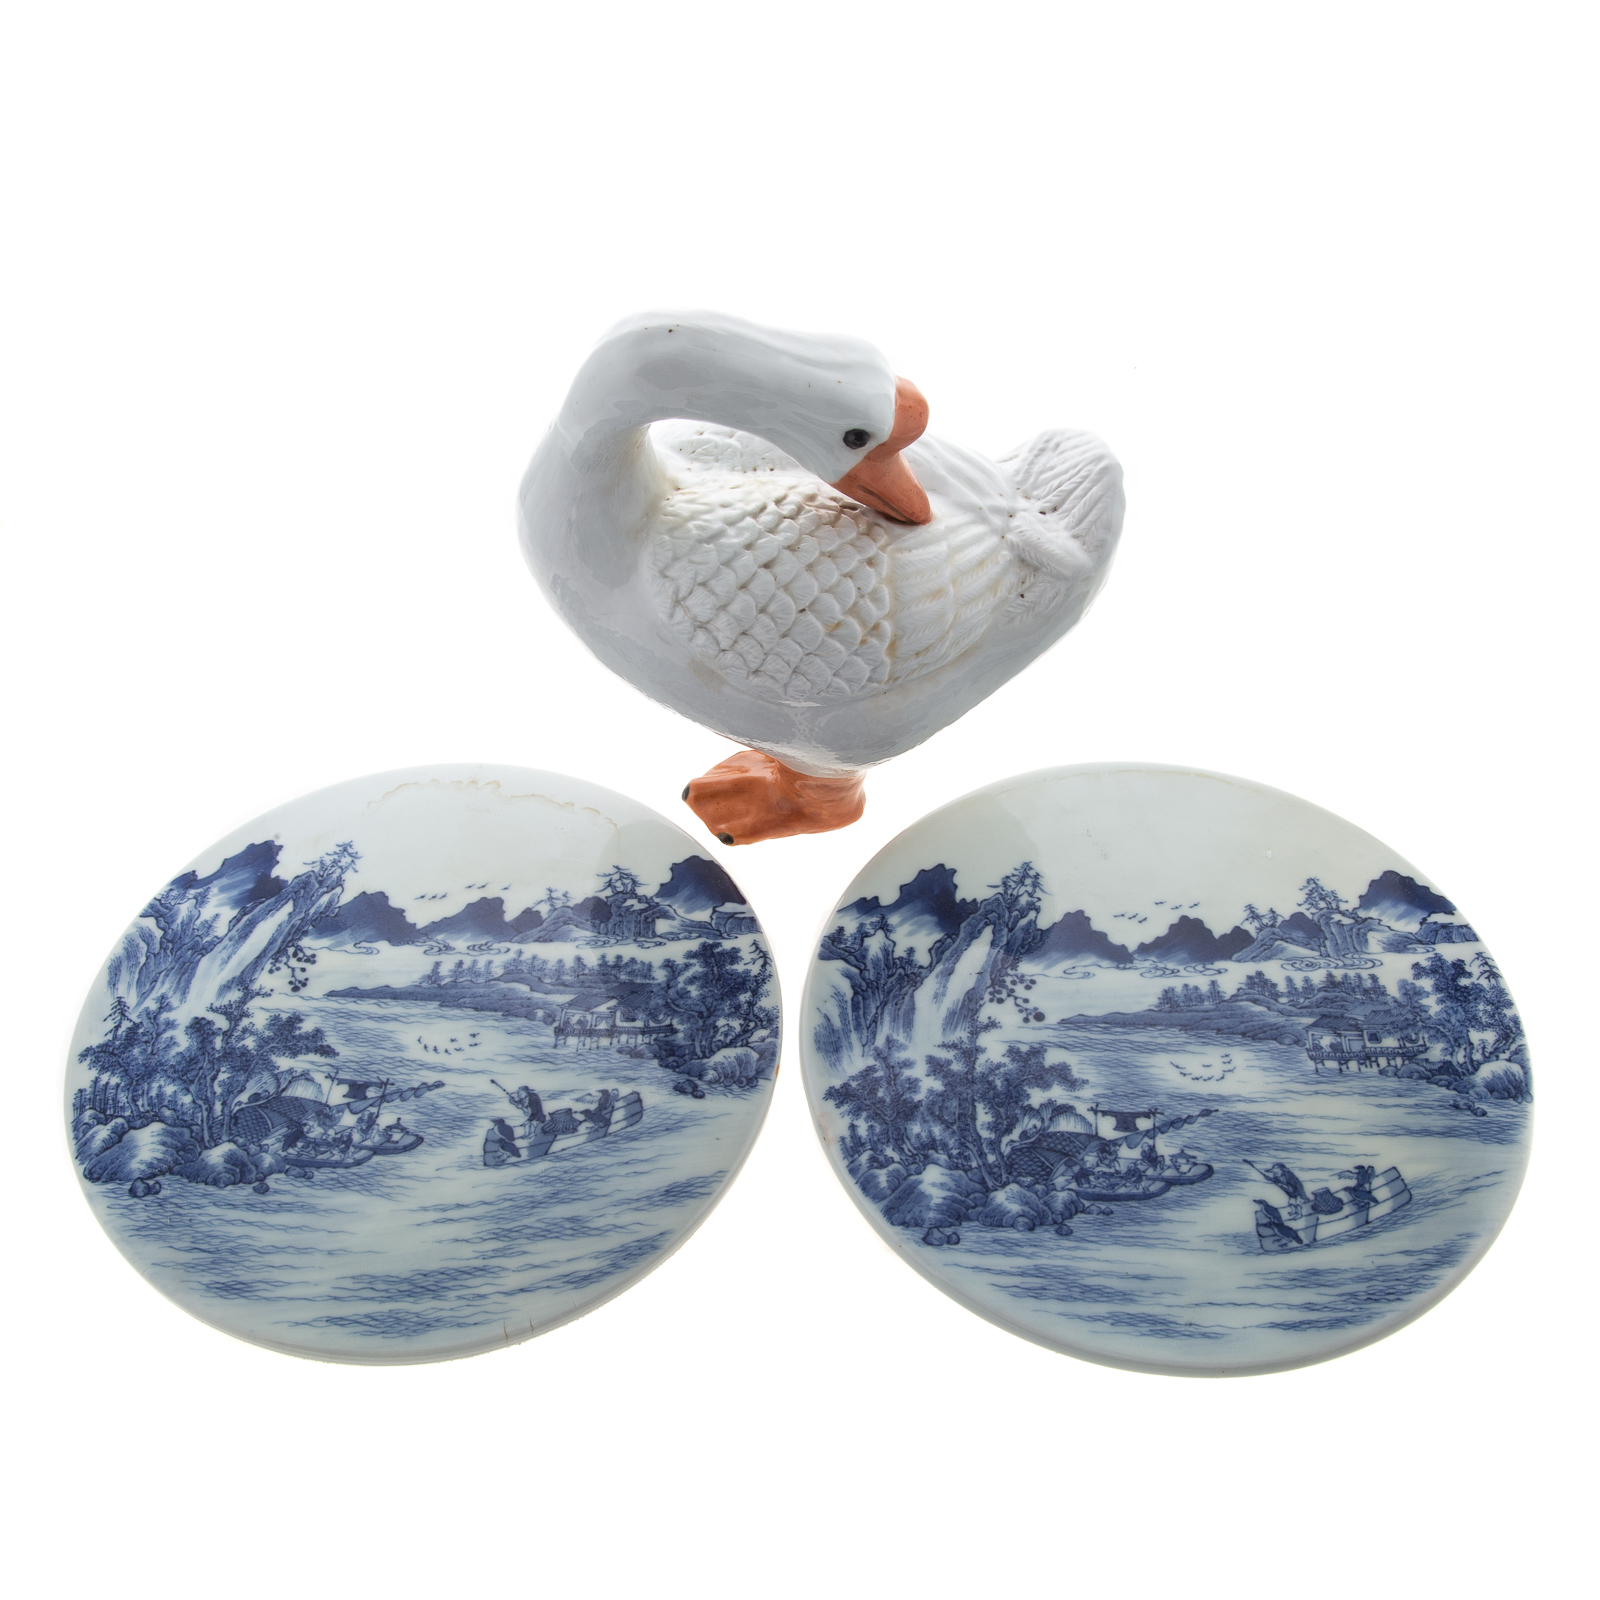 A PAIR OF CHINESE EXPORT TRIVETS